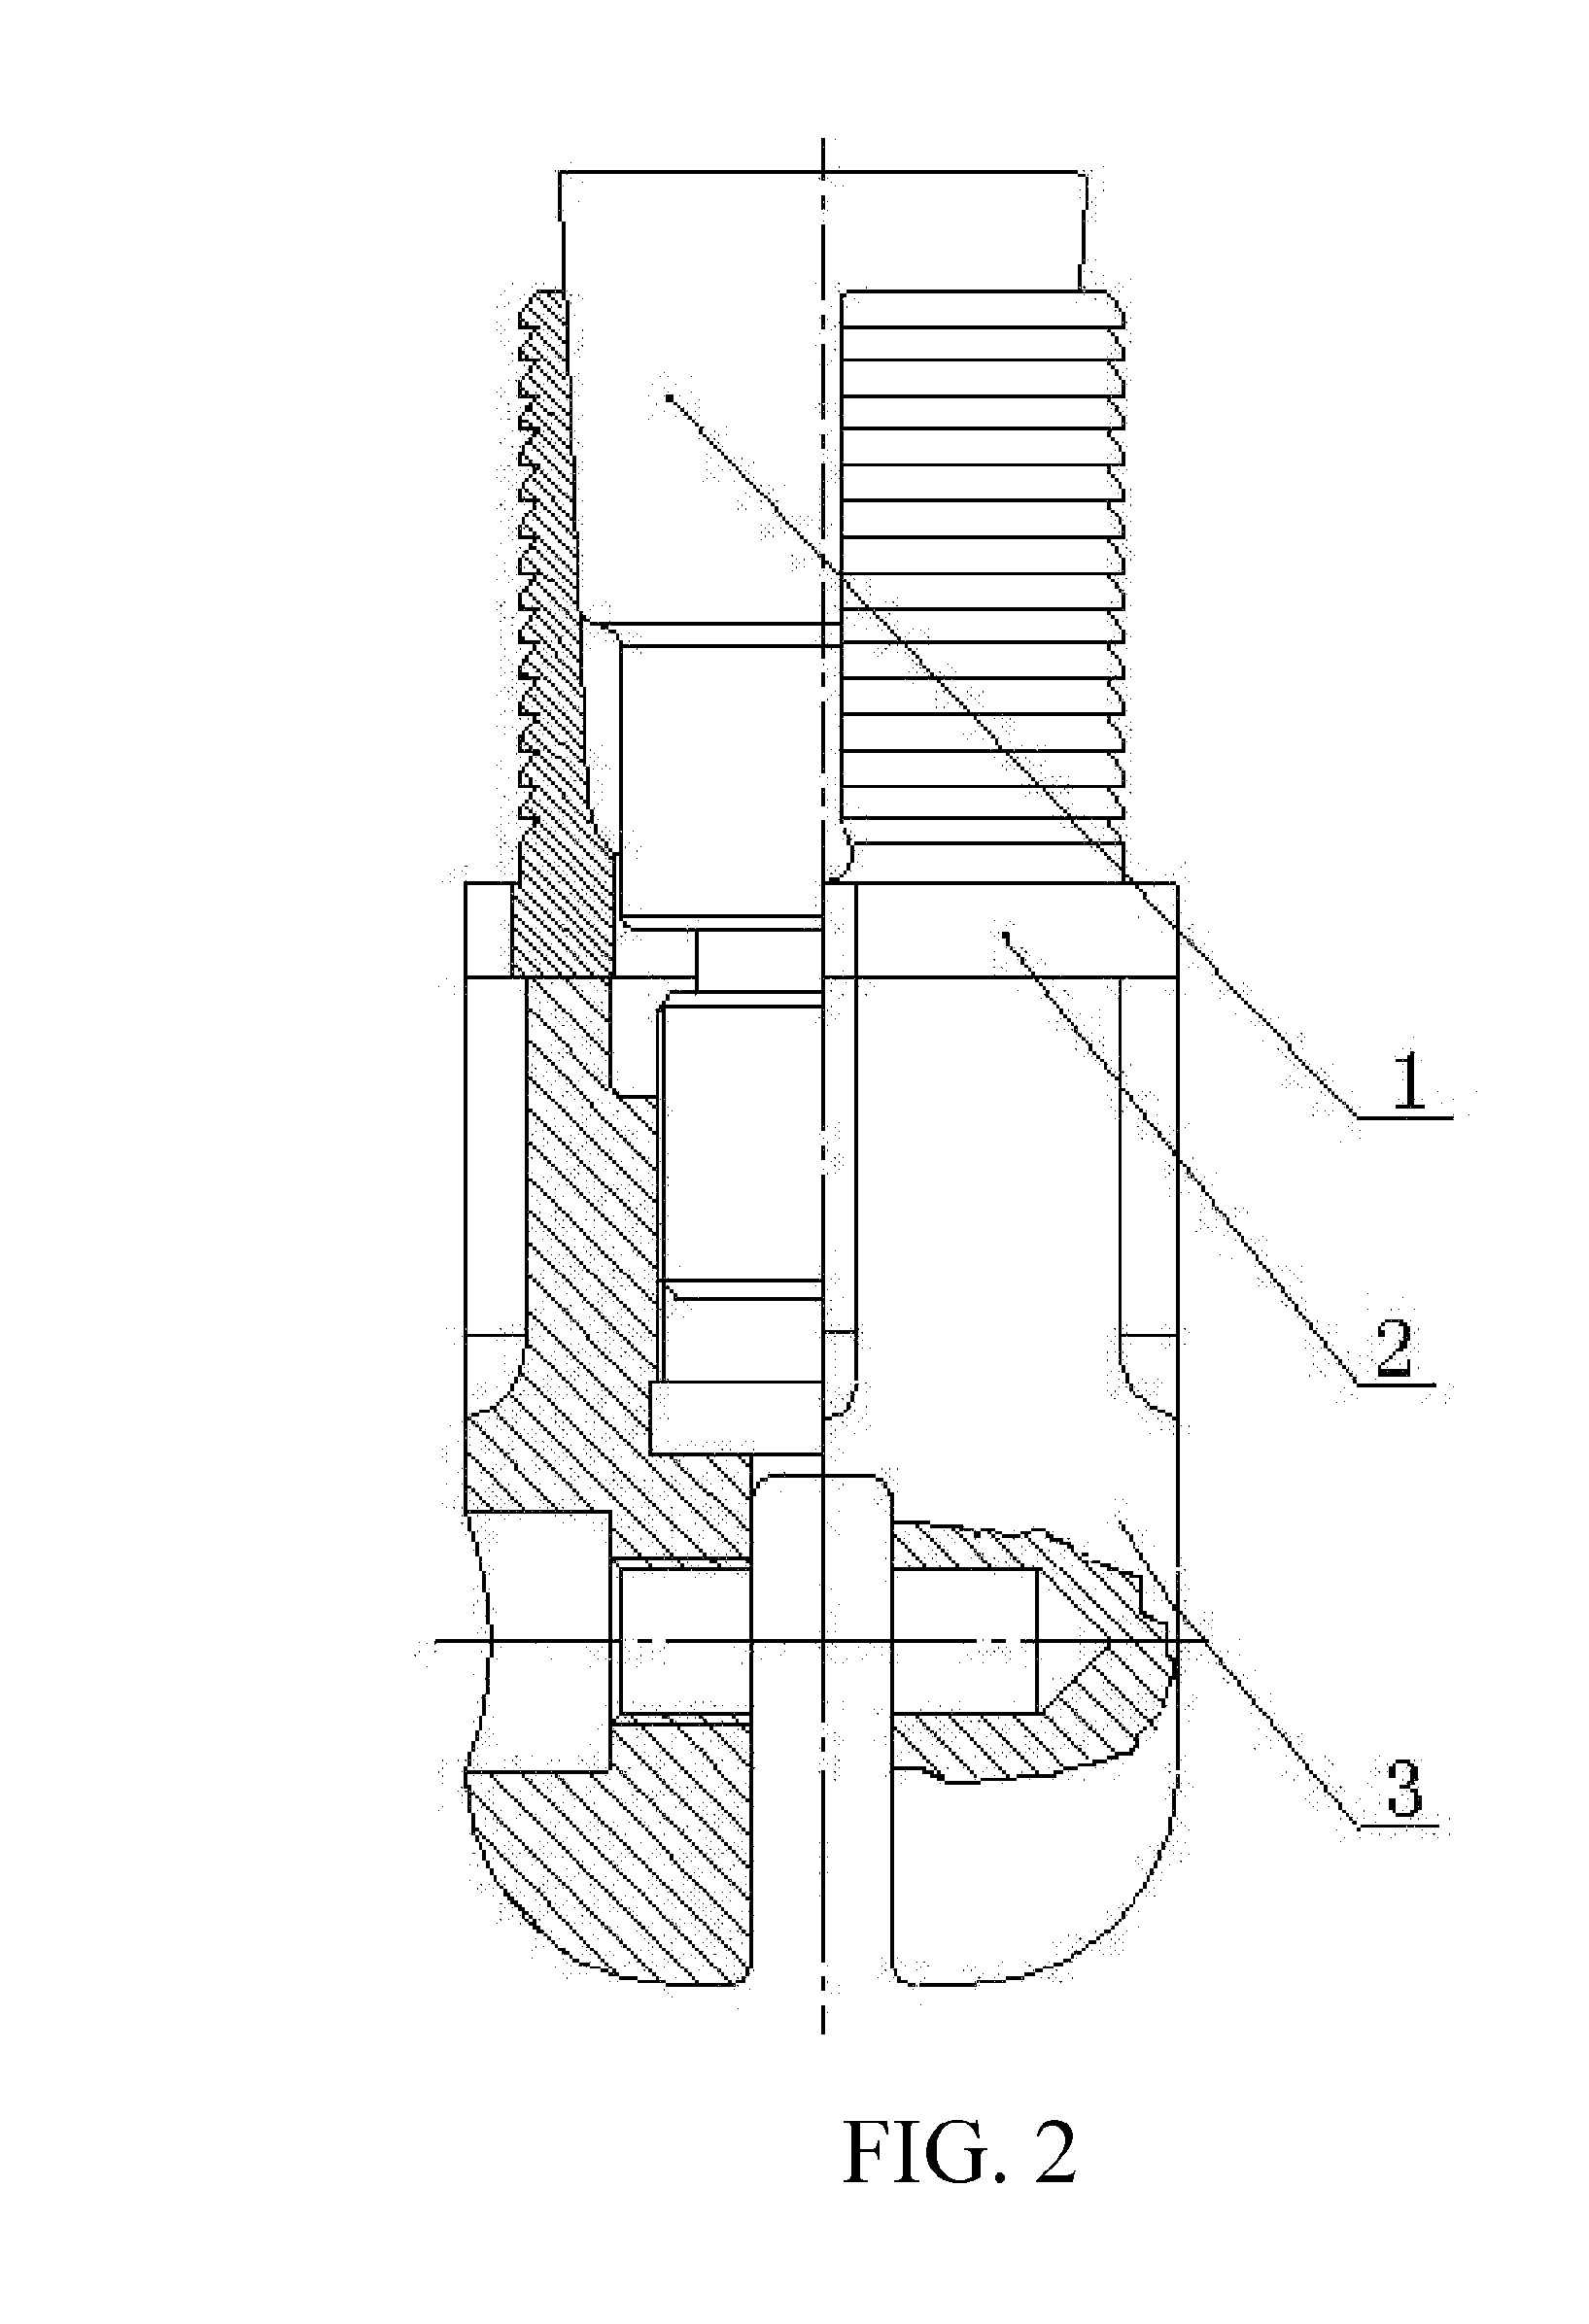 Guide device for coiled tubing